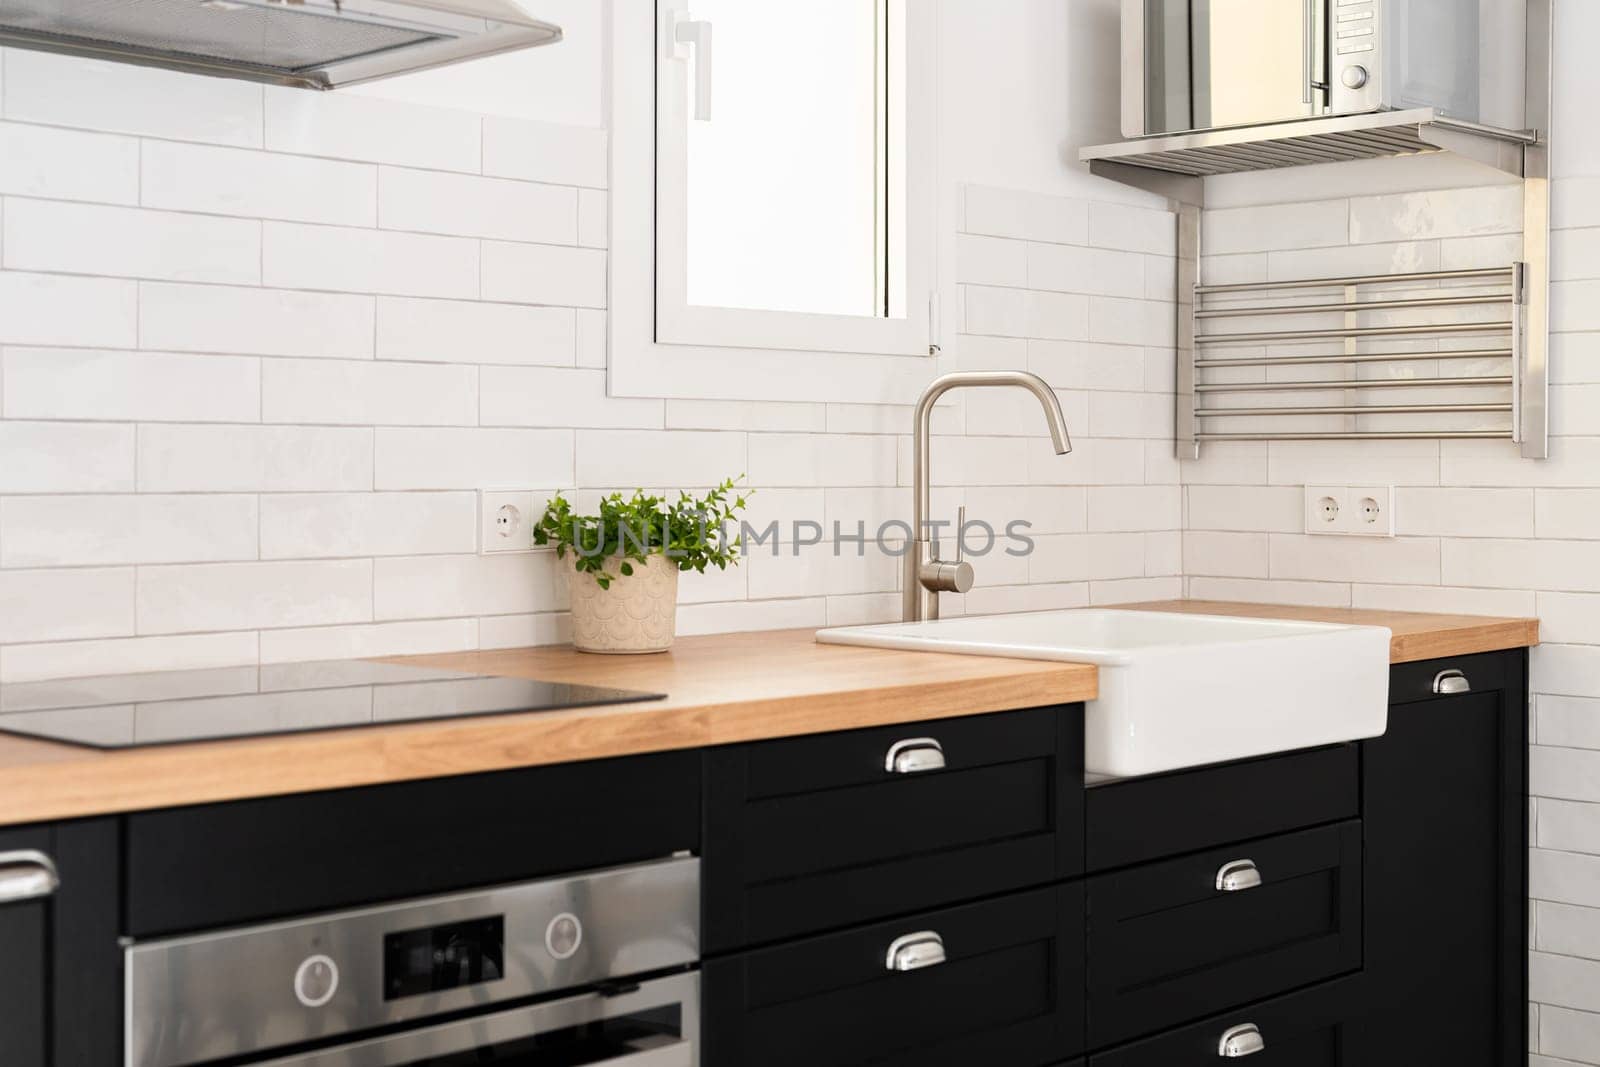 Washing sink with faucet by window in modern kitchen. Appliances and furniture in cooking zone of modern apartment. House interior